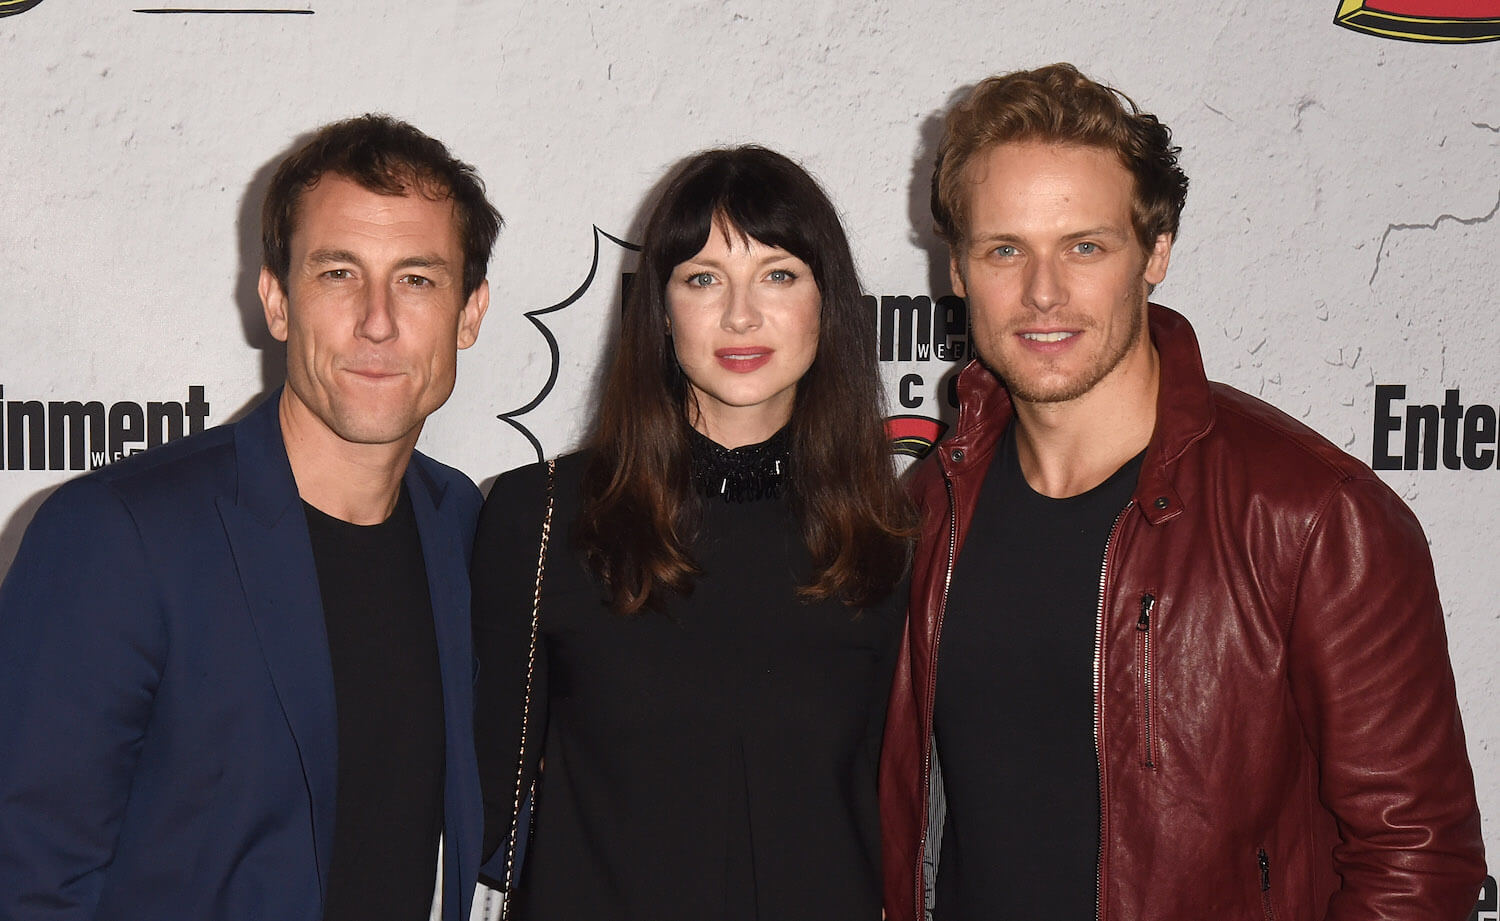 Tobias Menzies, Caitriona Balfe, and Sam Heughan of 'Outlander' standing side by side and smiling